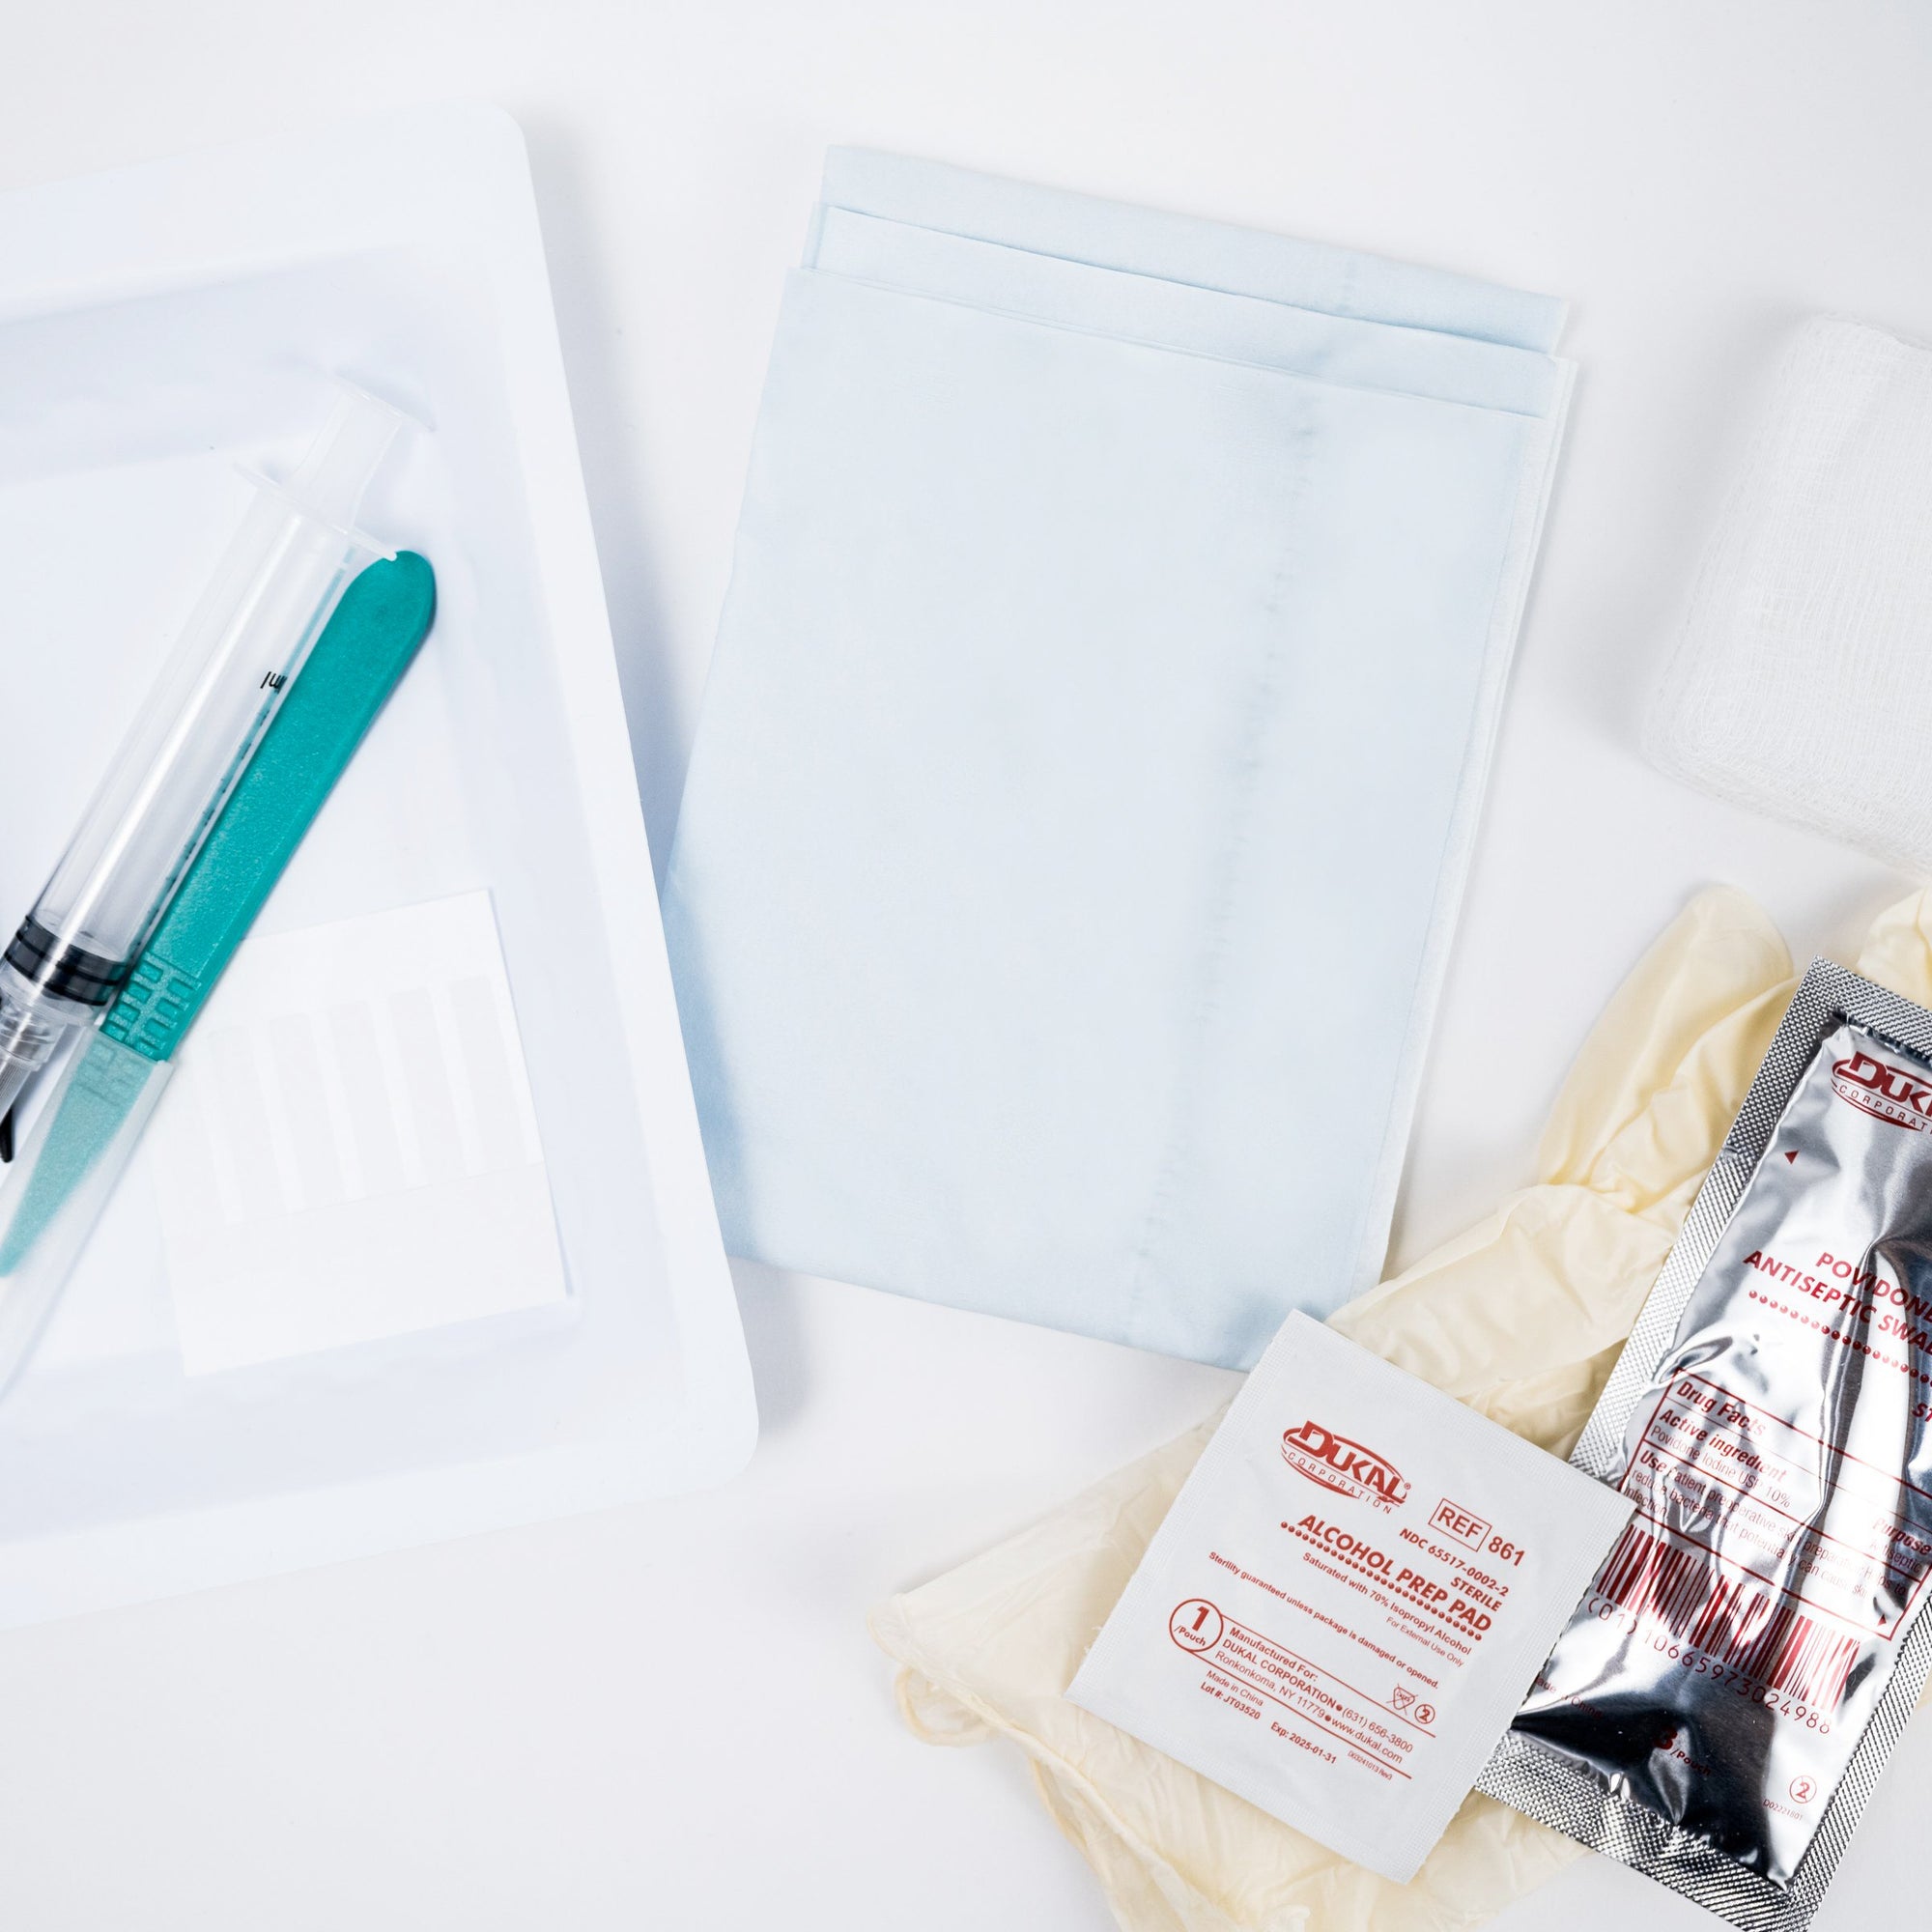 Hormone Pellet Insertion Kits with No Trocar